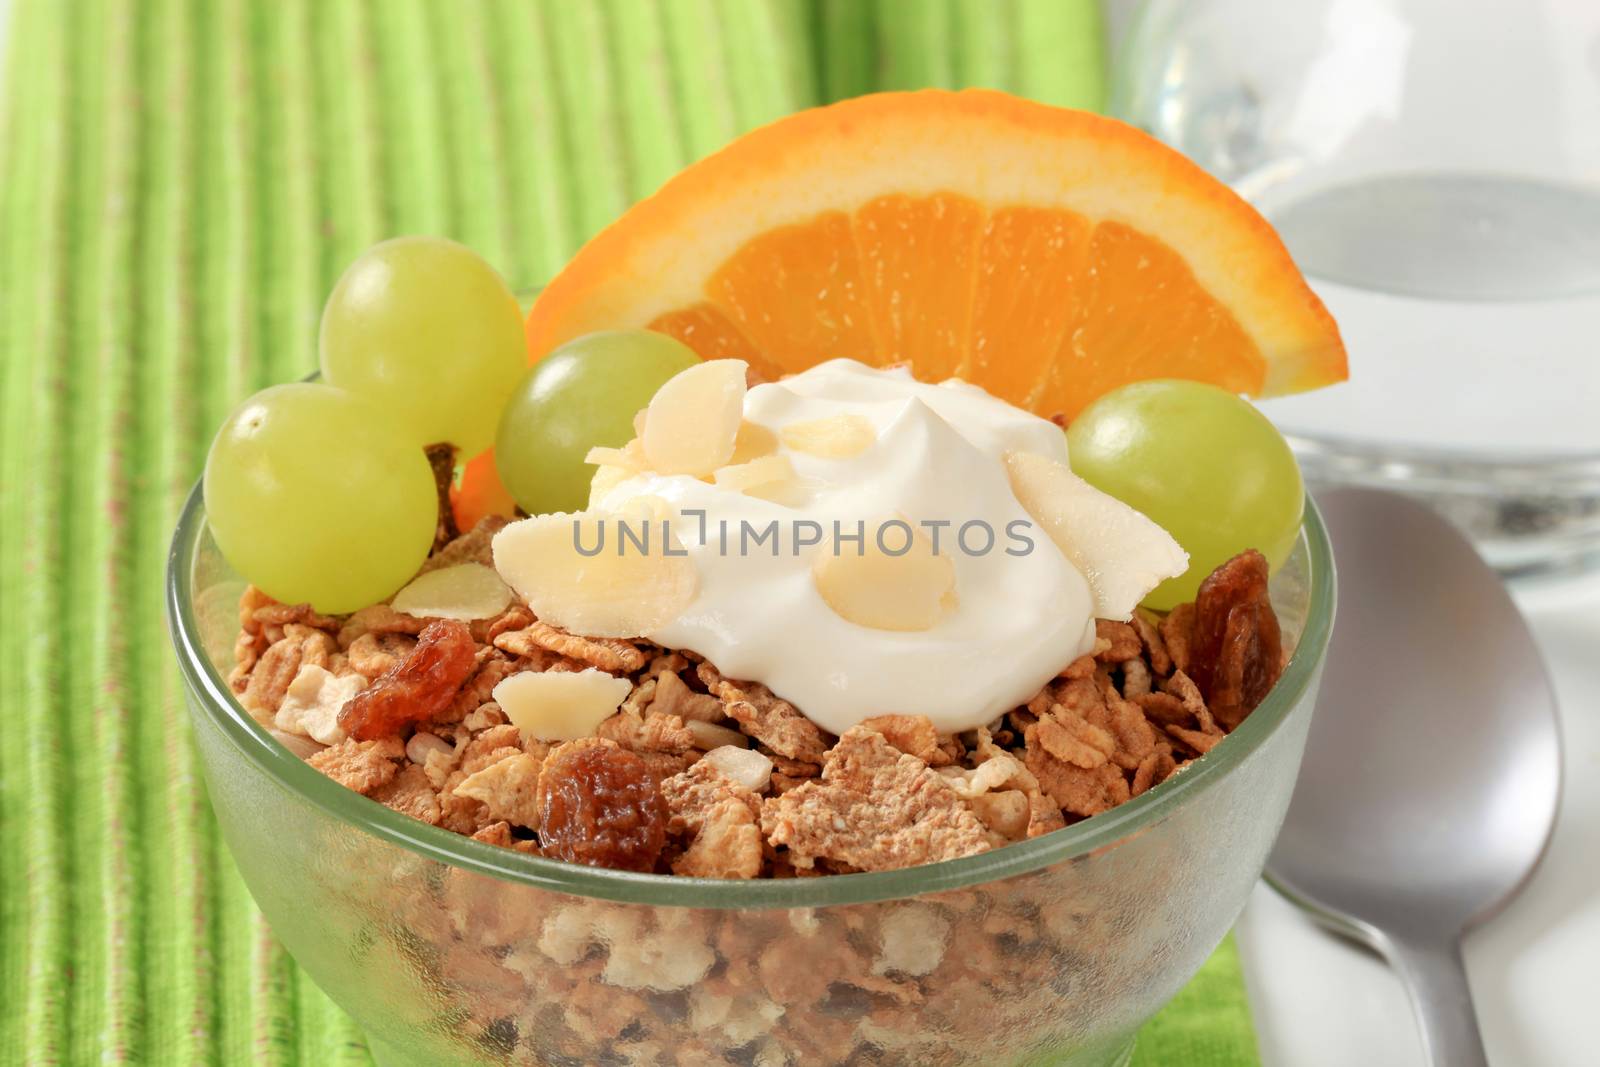 Bowl of breakfast cereals with fruit and quark